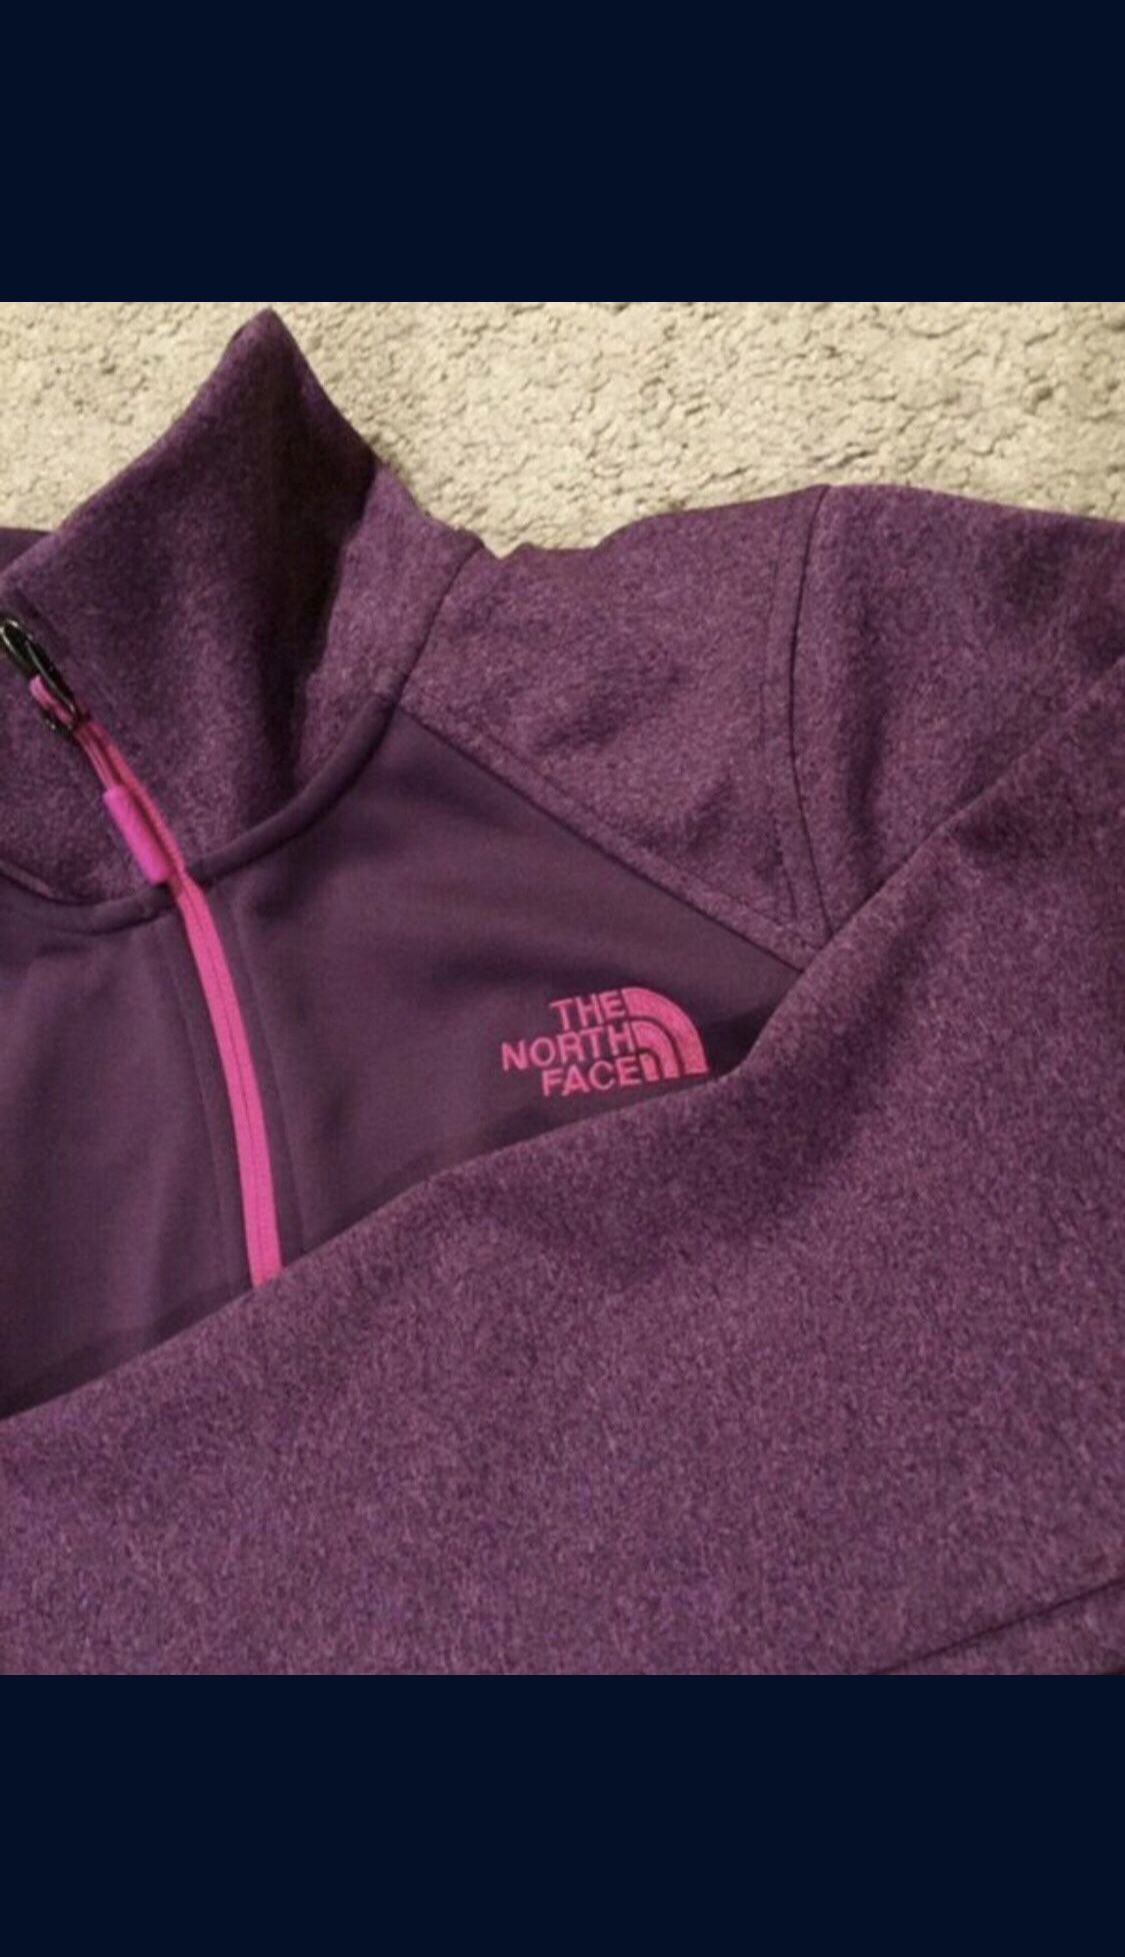 North Face / Thin Softshell Track Jacket Coat / SIZE: Women's Small / Like New w/o Tags! / Heathered Purple & Pink